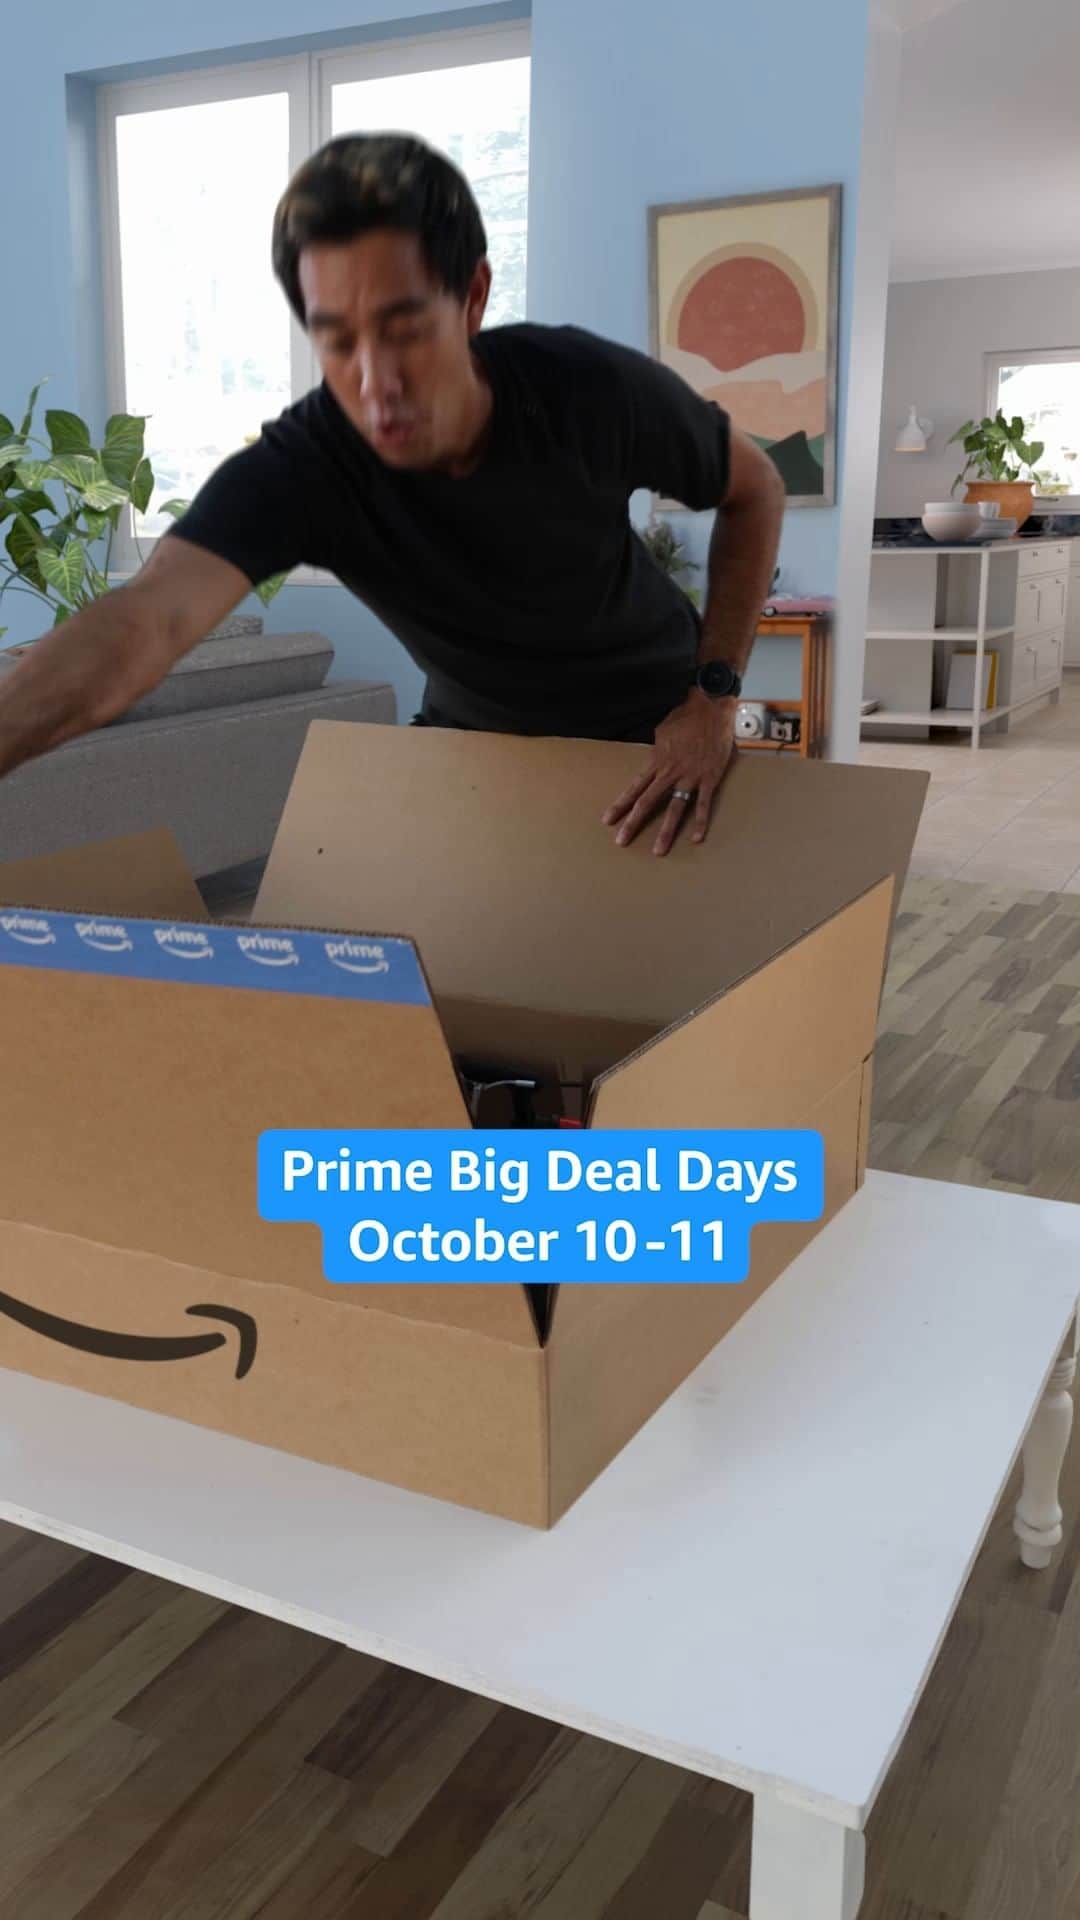 Amazonのインスタグラム：「Ride the path to big deals on Prime Big Deal Days this October 10-11. 🚵‍♂️ #PrimeBigDealDays」